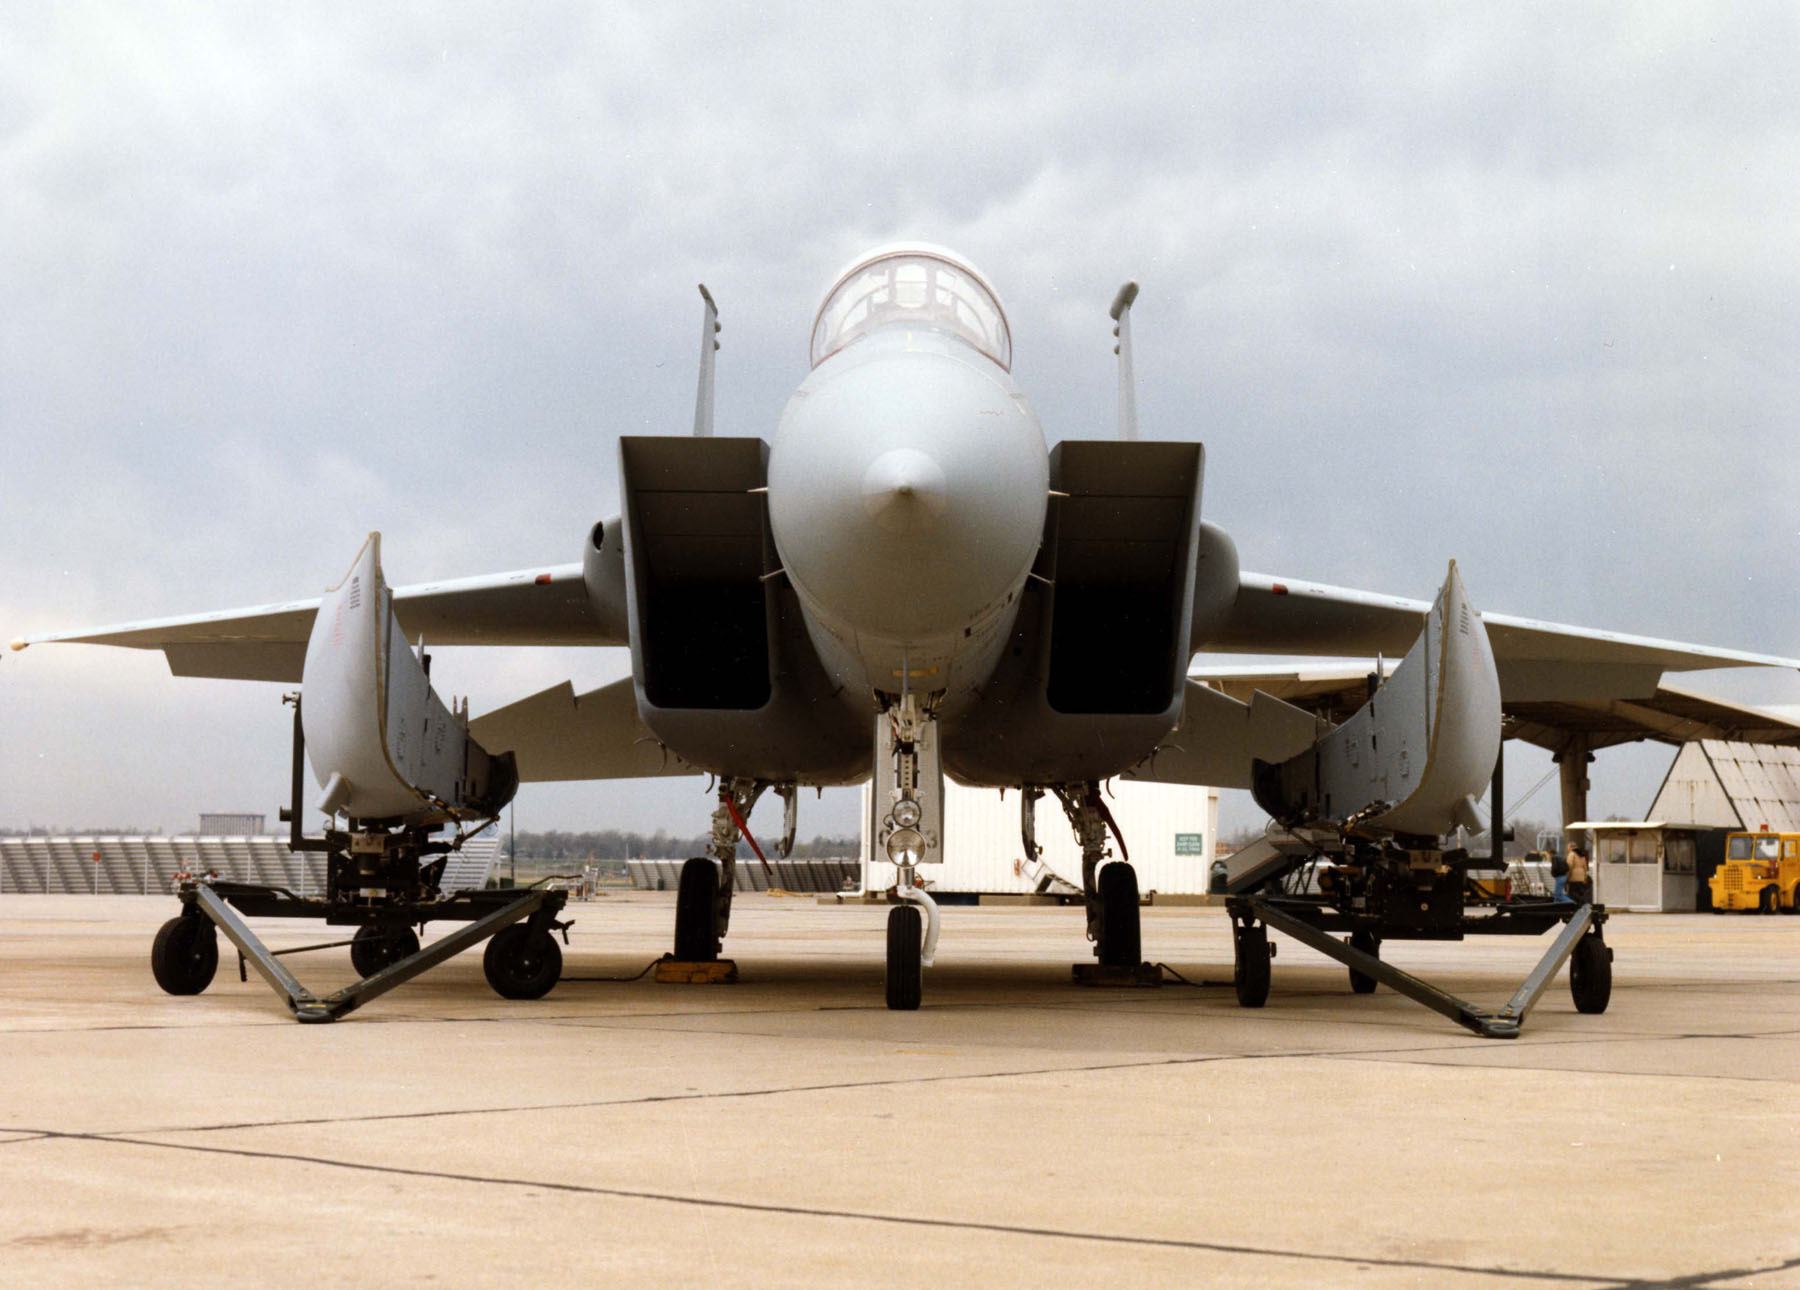 McDonnell_Douglas_F-15C_with_the_conformal_FAST_PACK_fuel_tanks_060905-F-1234S-017.jpg